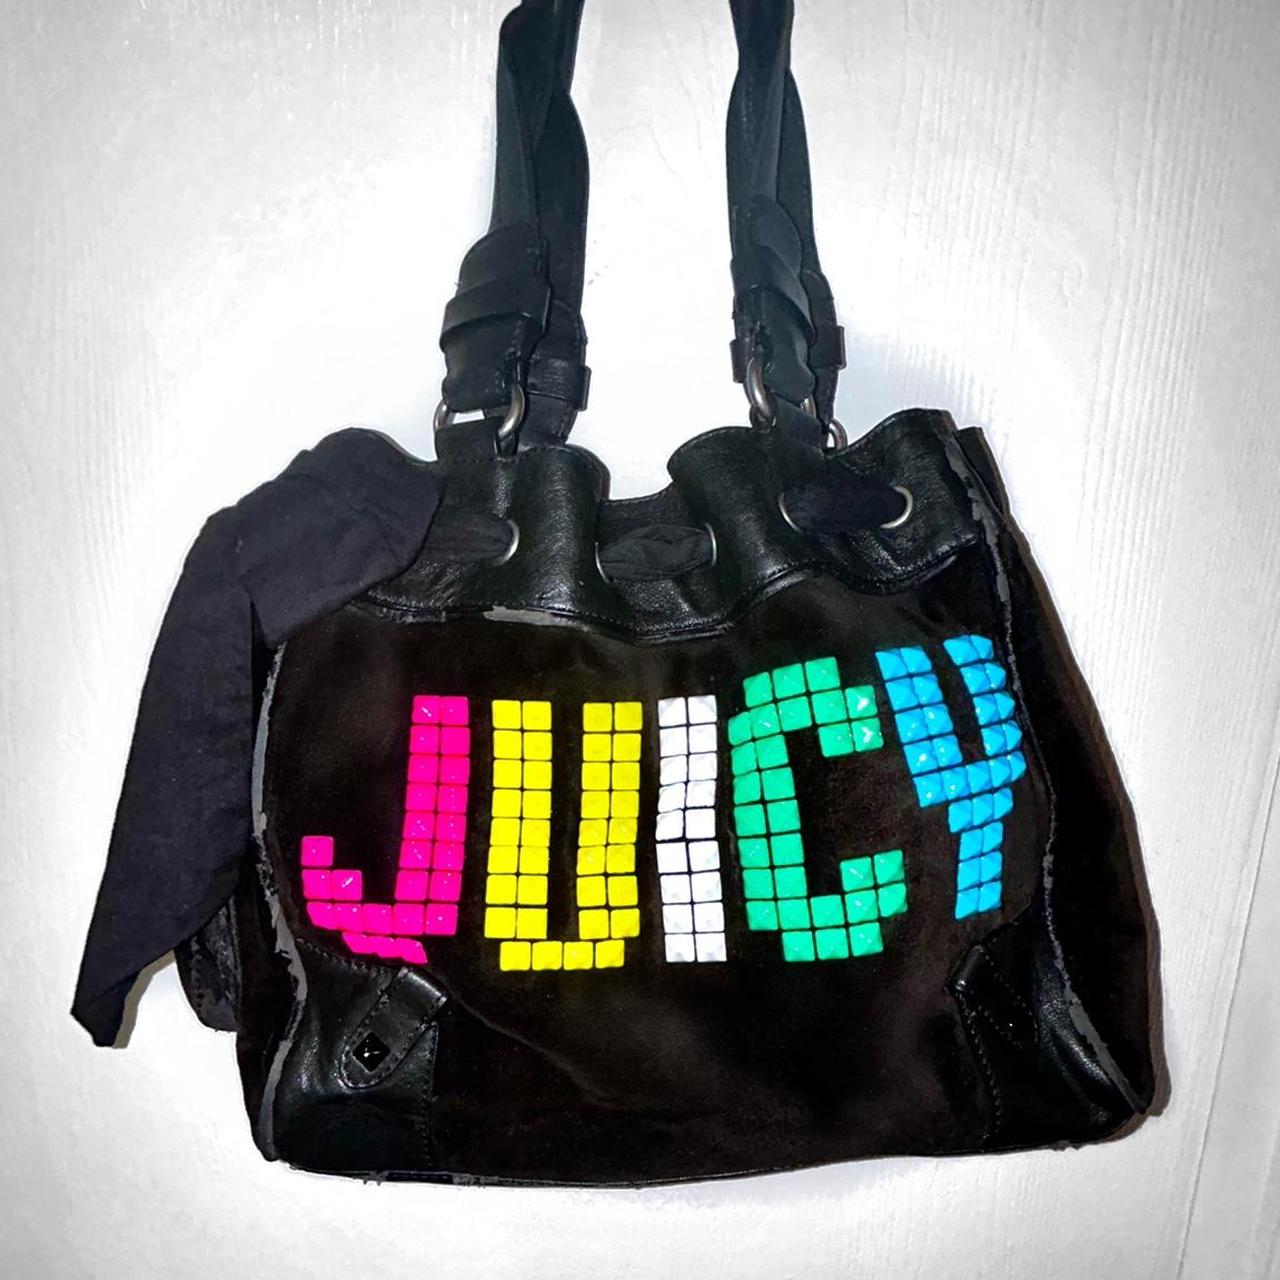 Juicy Couture Rainbow Satchels for Women